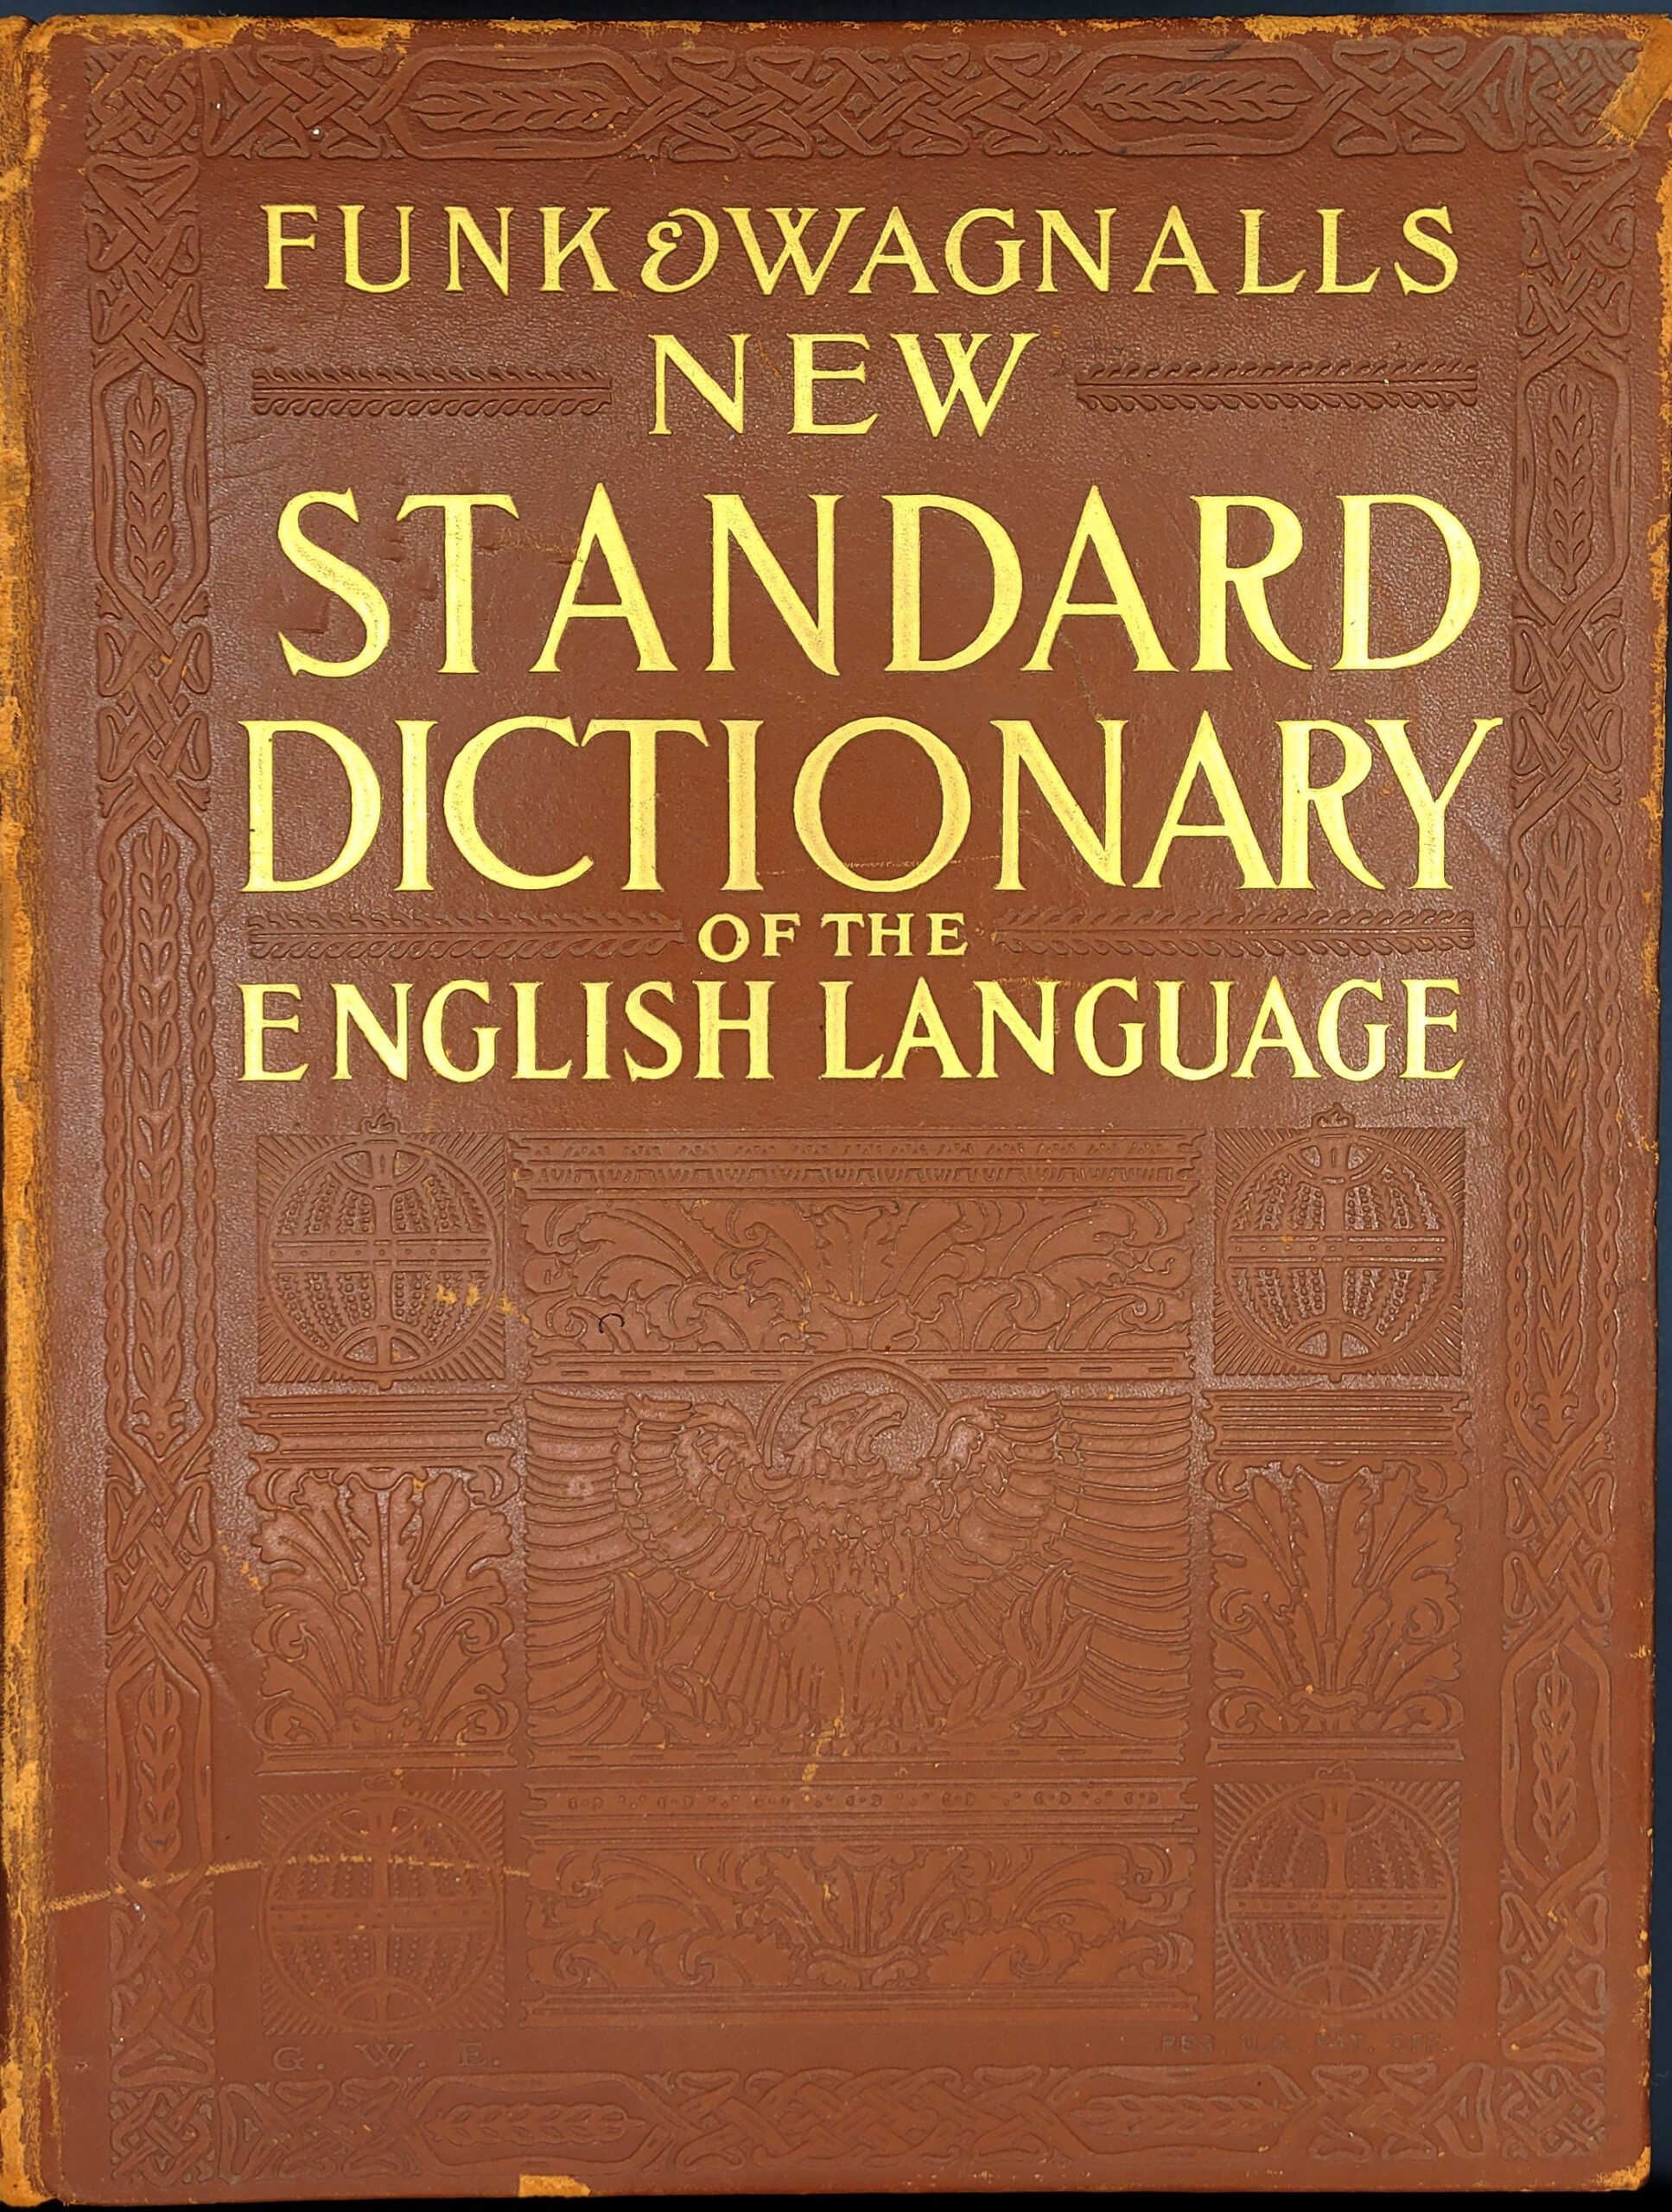 Front cover of the 1932 edition of the Funk and Wagnalls New Standard Dictionary of the English Language